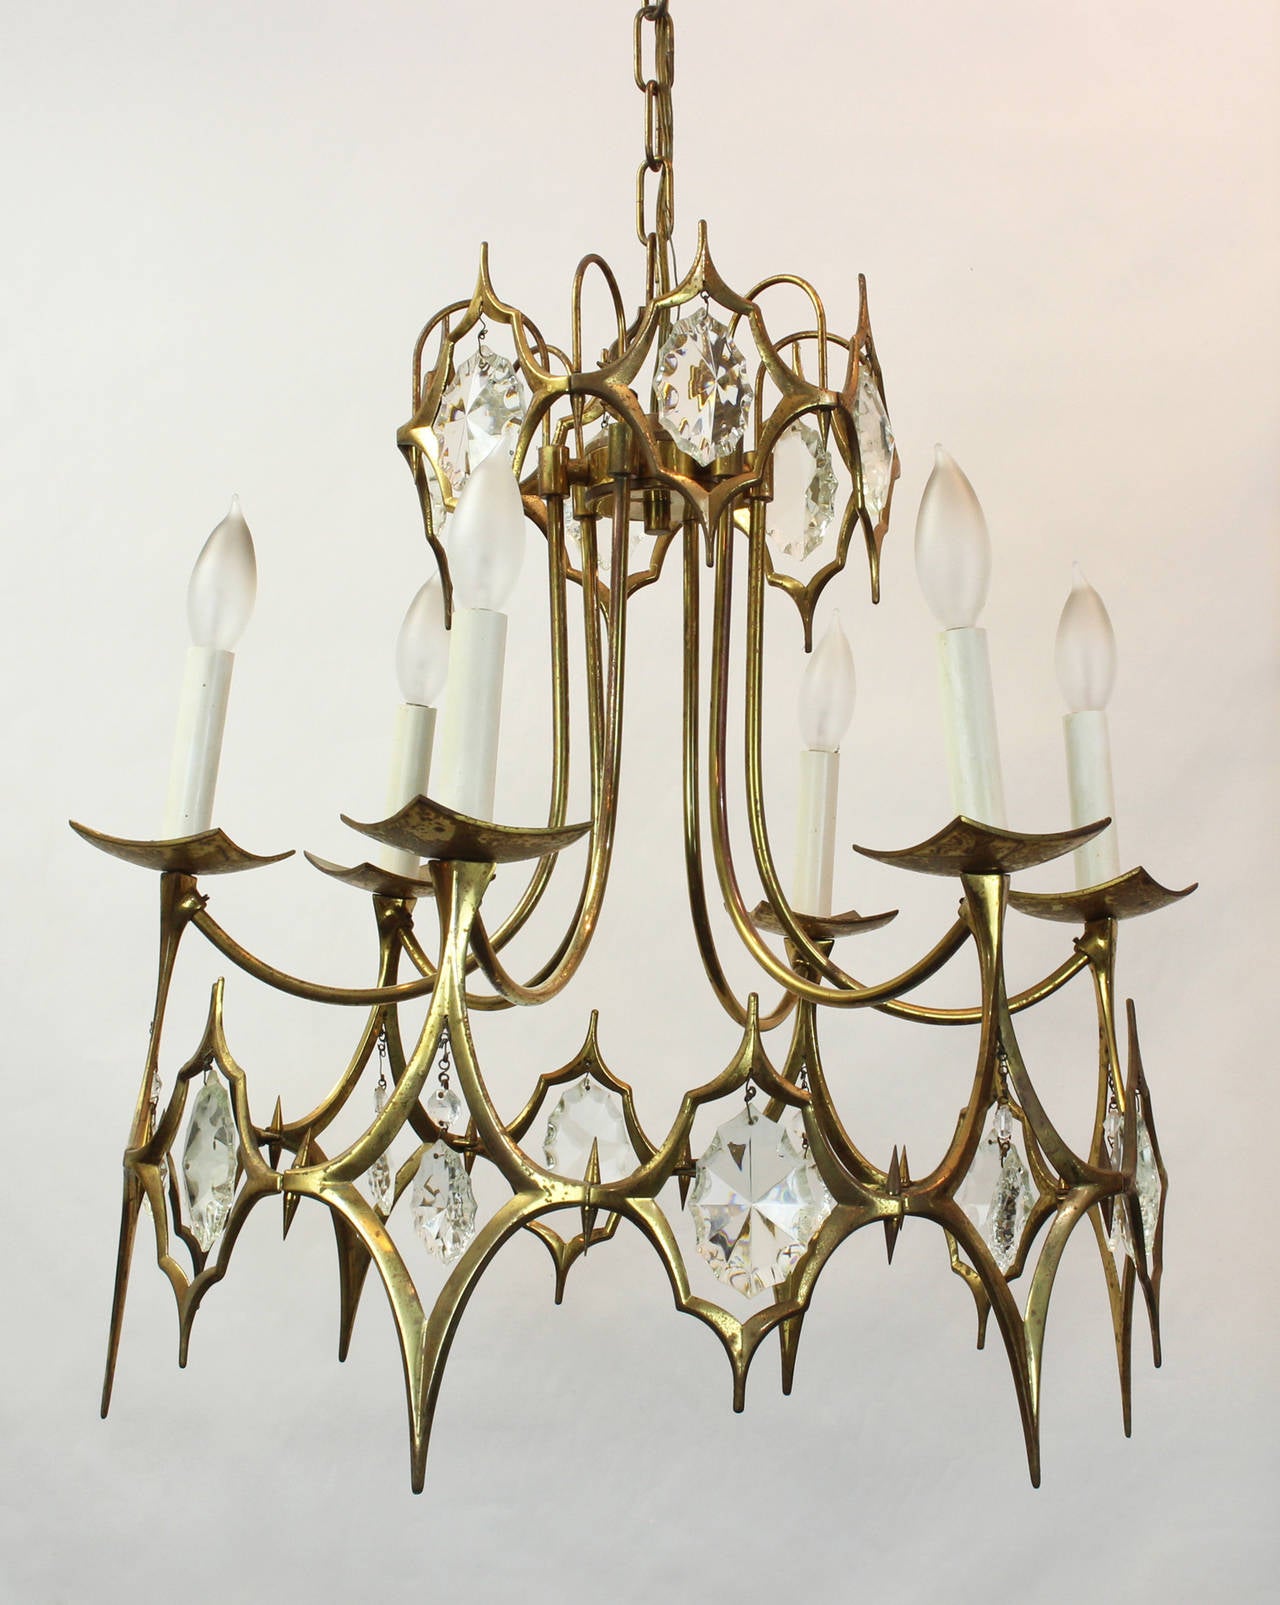 An elegant Regency inspired brass and crystal chandelier dating from the 1960s.